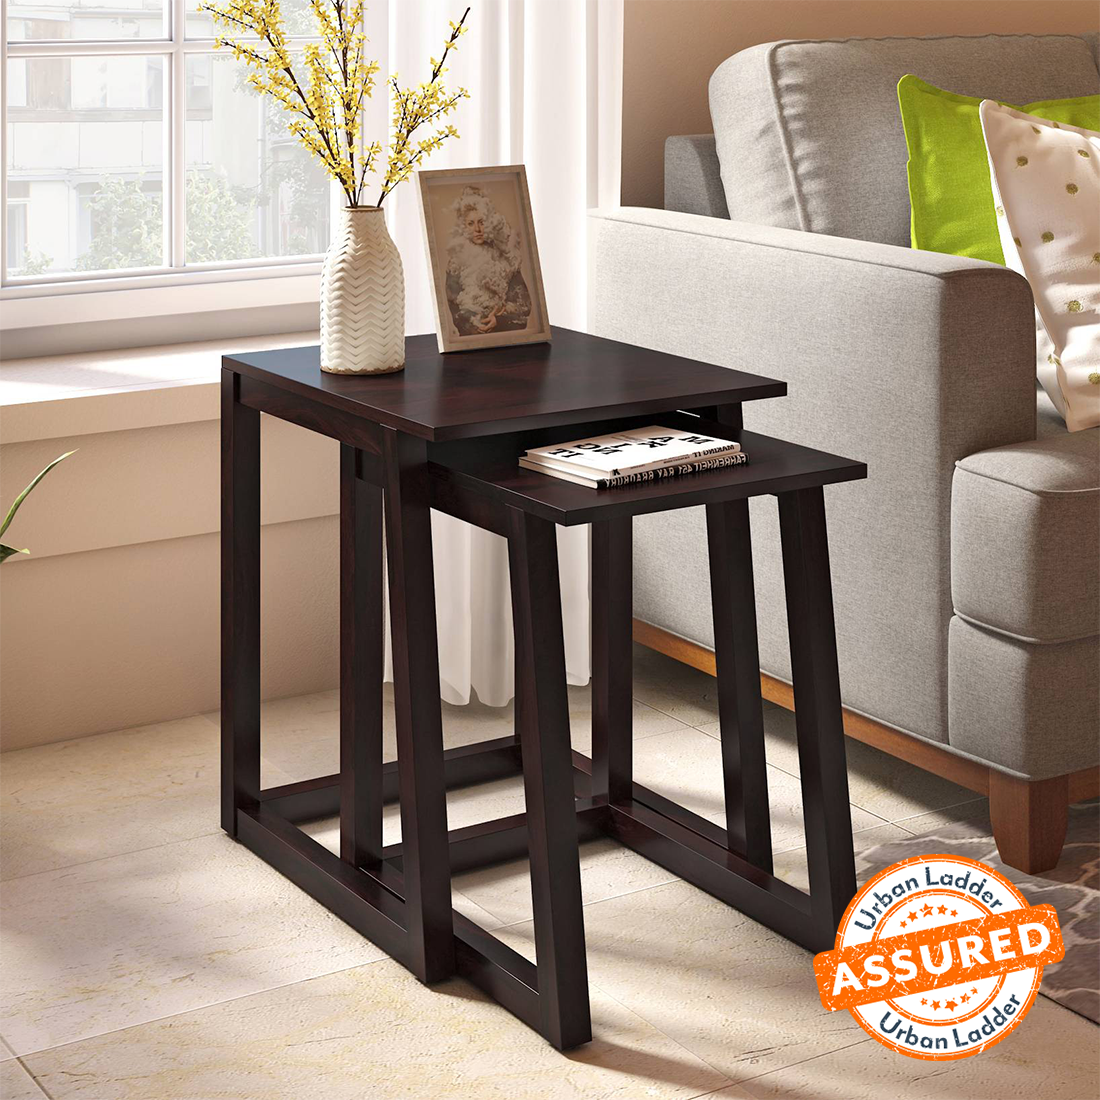 Side Tables Online And Get Up To 50